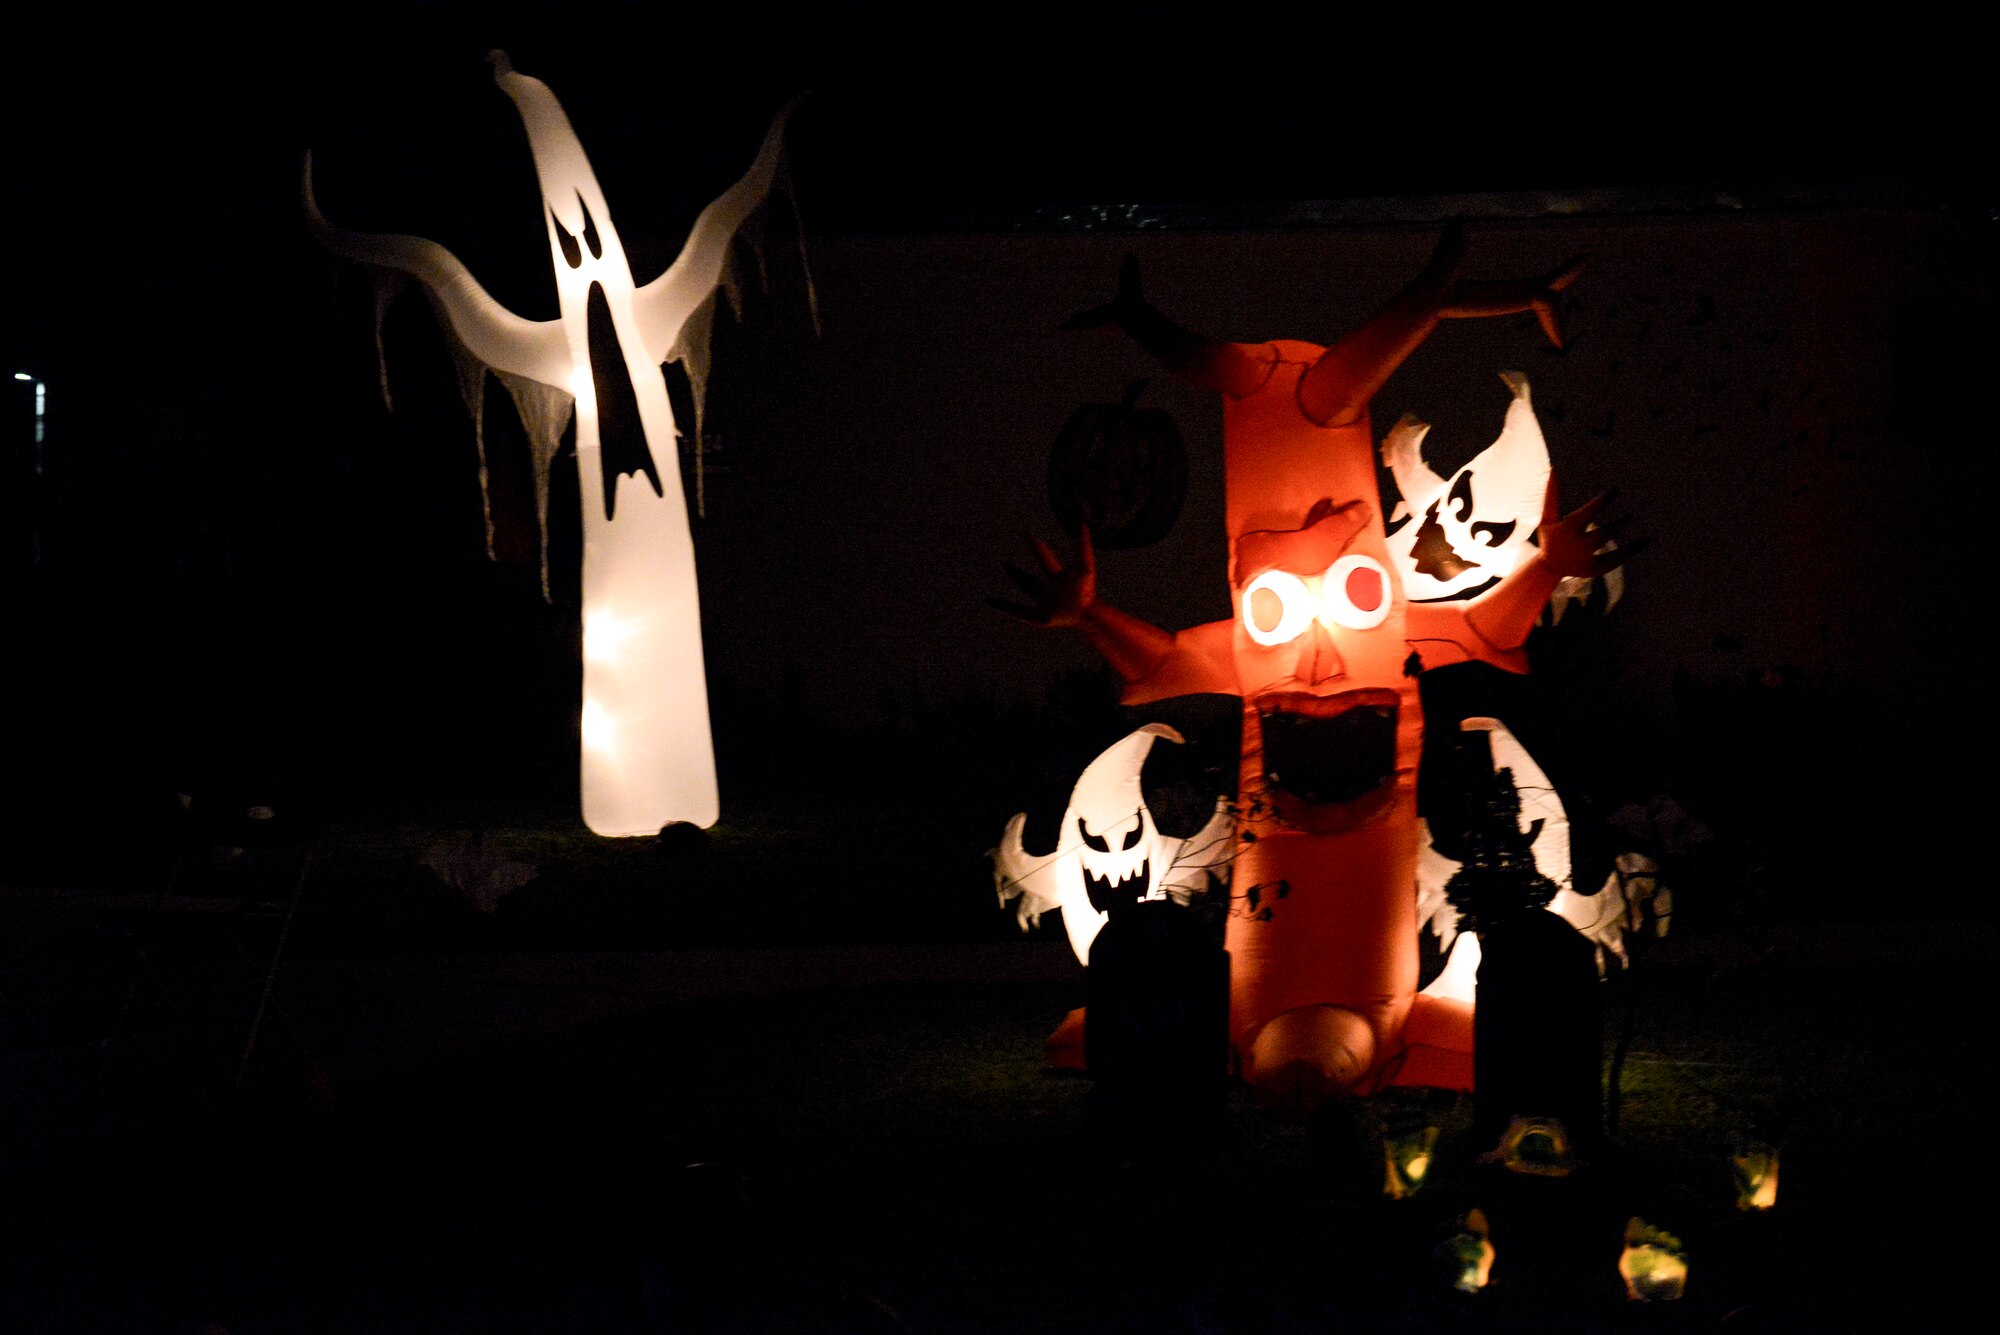 Halloween decorations outside a house on Rota Drive on Andersen Air Force Base, Guam Oct, 31, 2014. Rota drive was one of the main attractions for children who went trick-or-treating on base for Halloween at Andersen Air Force Base, Guam, Oct. 31. Other Halloween festivities included a haunted house, created by the 36th Civil Engineering Squadron, which attracted more than several hundred people.